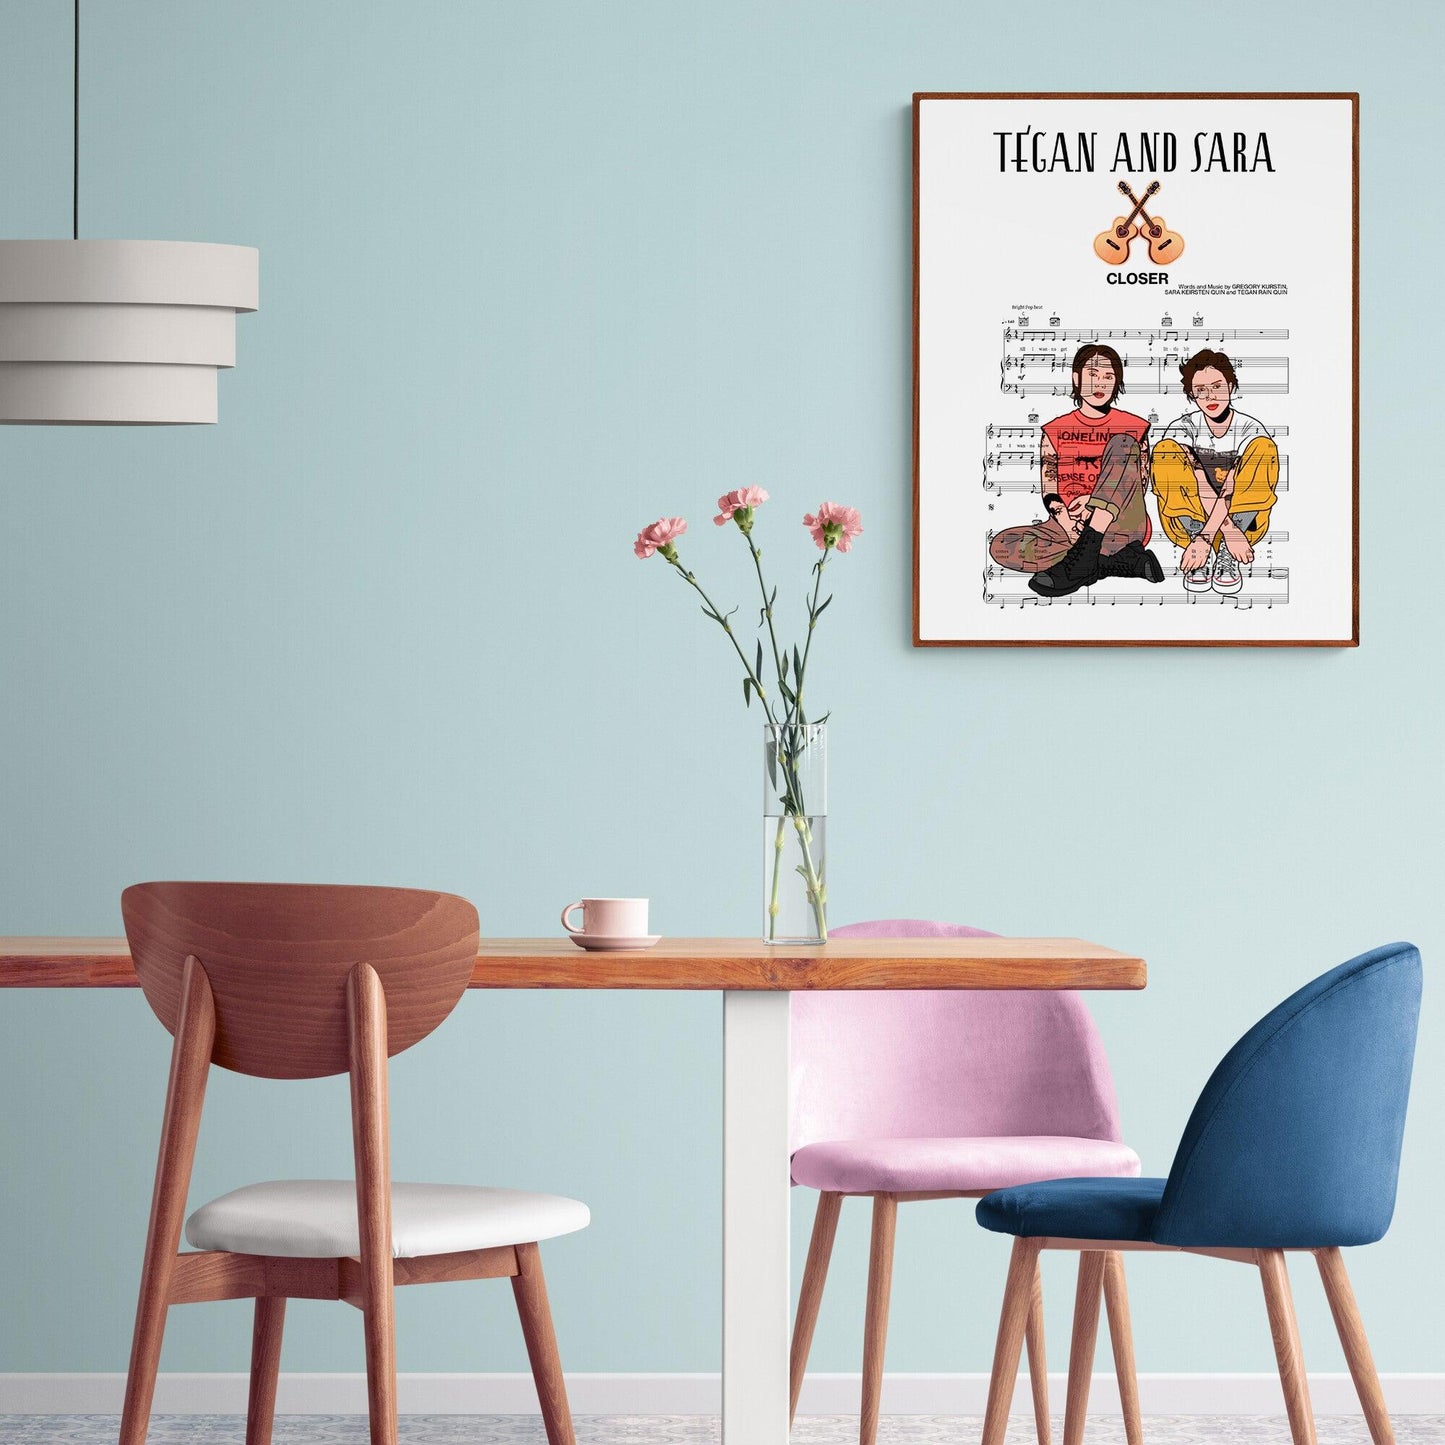 This Tegan and Sara - Closer Poster is a hand-crafted print featuring lyrics from their iconic song. This elegantly framed artwork brings the beloved song to visual life, ideal for completing any wall or office decor. This custom song lyric art is the perfect adornment for your space and will bring you into their musical world.